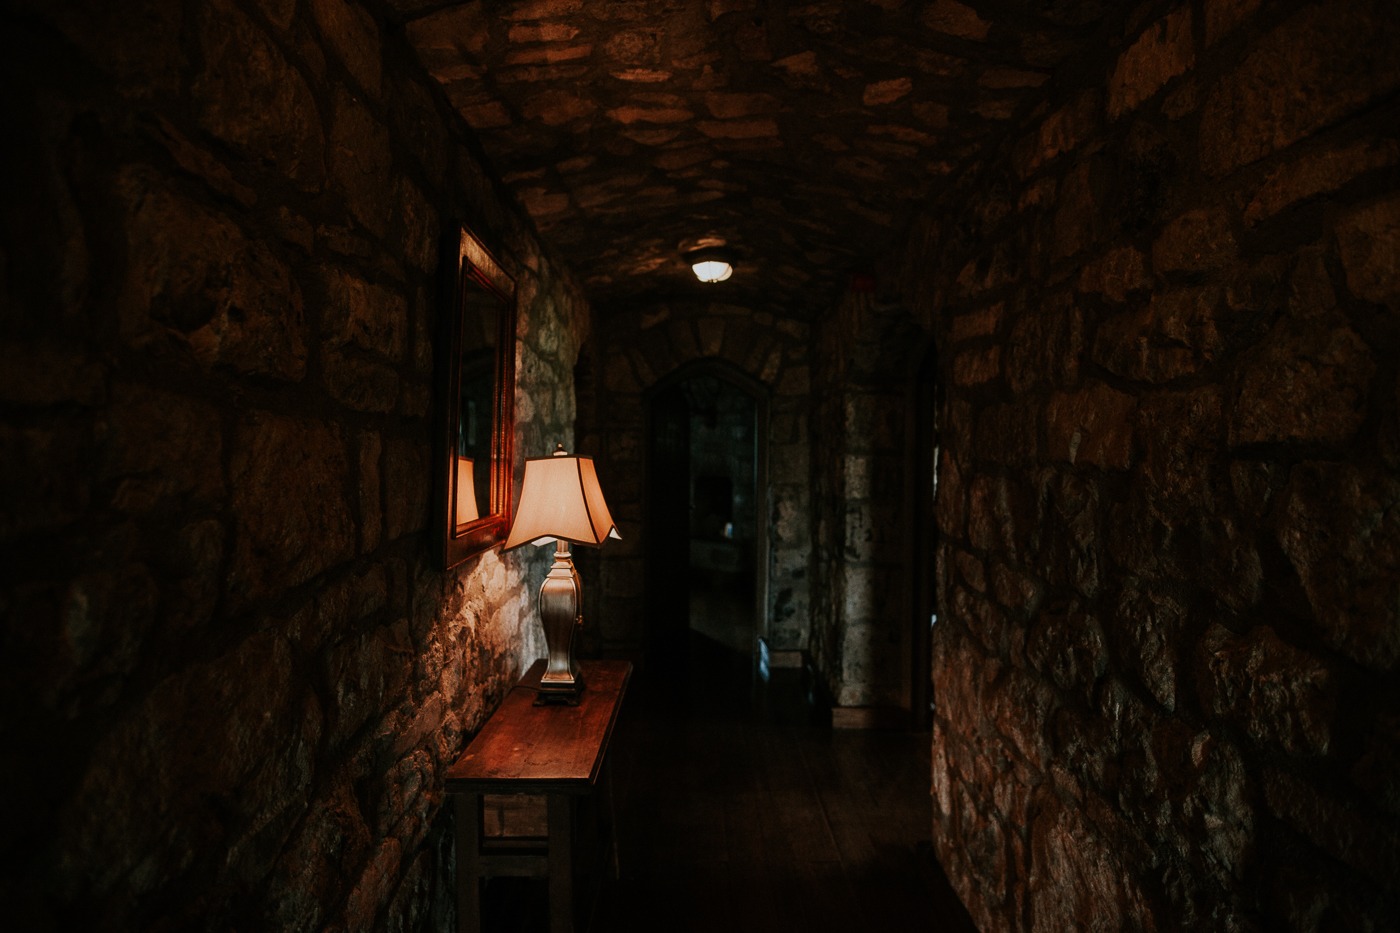 A close up of a stone building in a dark room